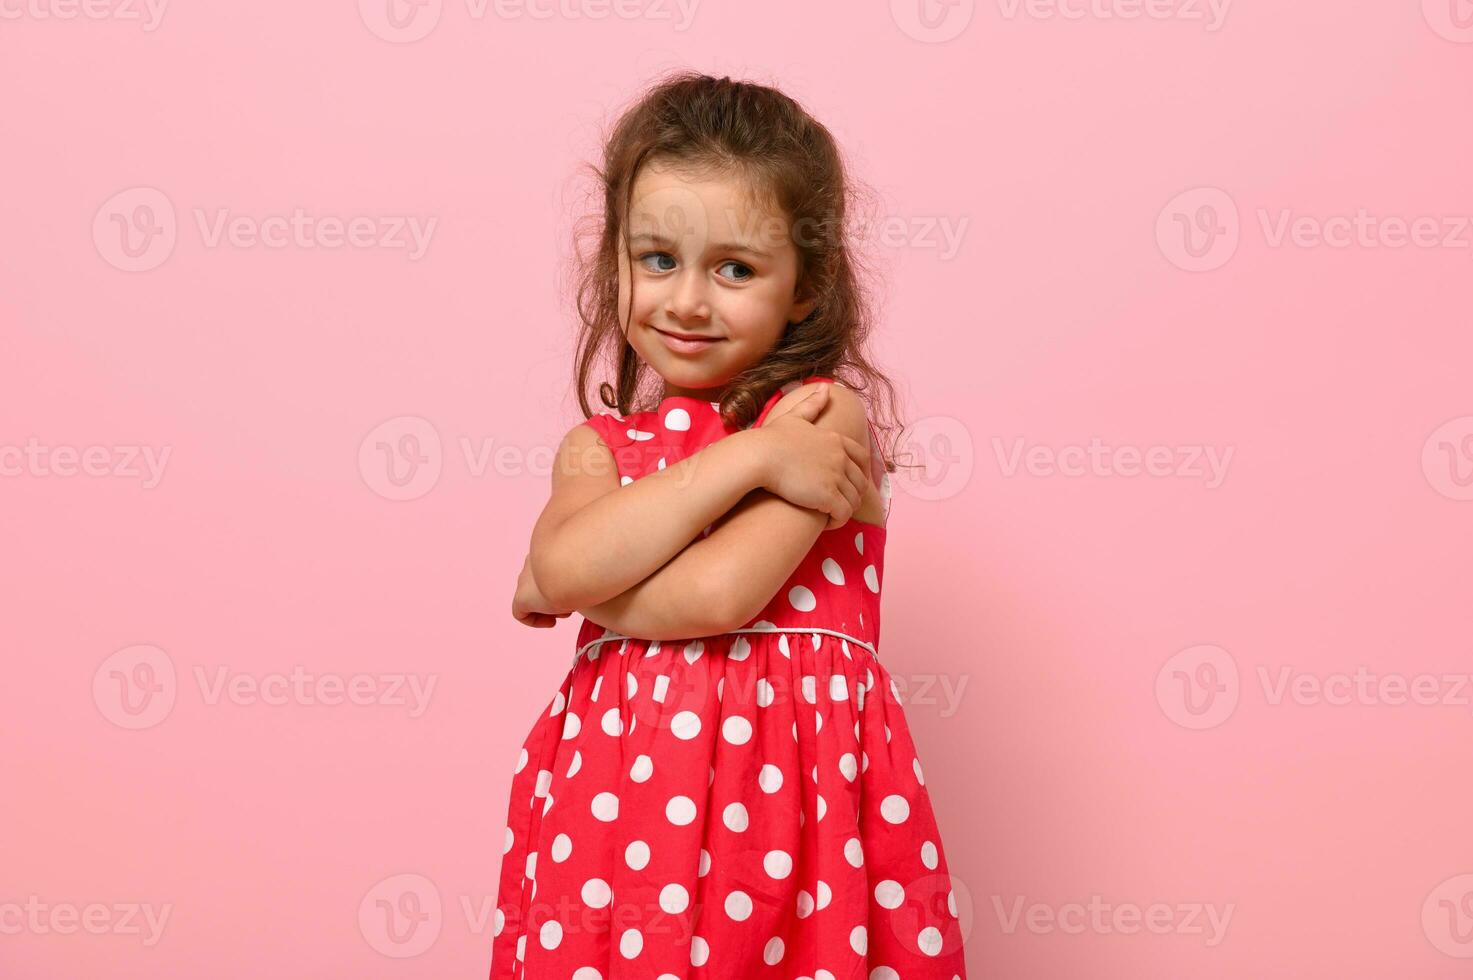 Gorgeous shyly 4 years kid in polka-dots dress hugs herself, sweet smiles posing on pink wall background with space for text. Confident portrait of beautiful baby girl for advertising photo